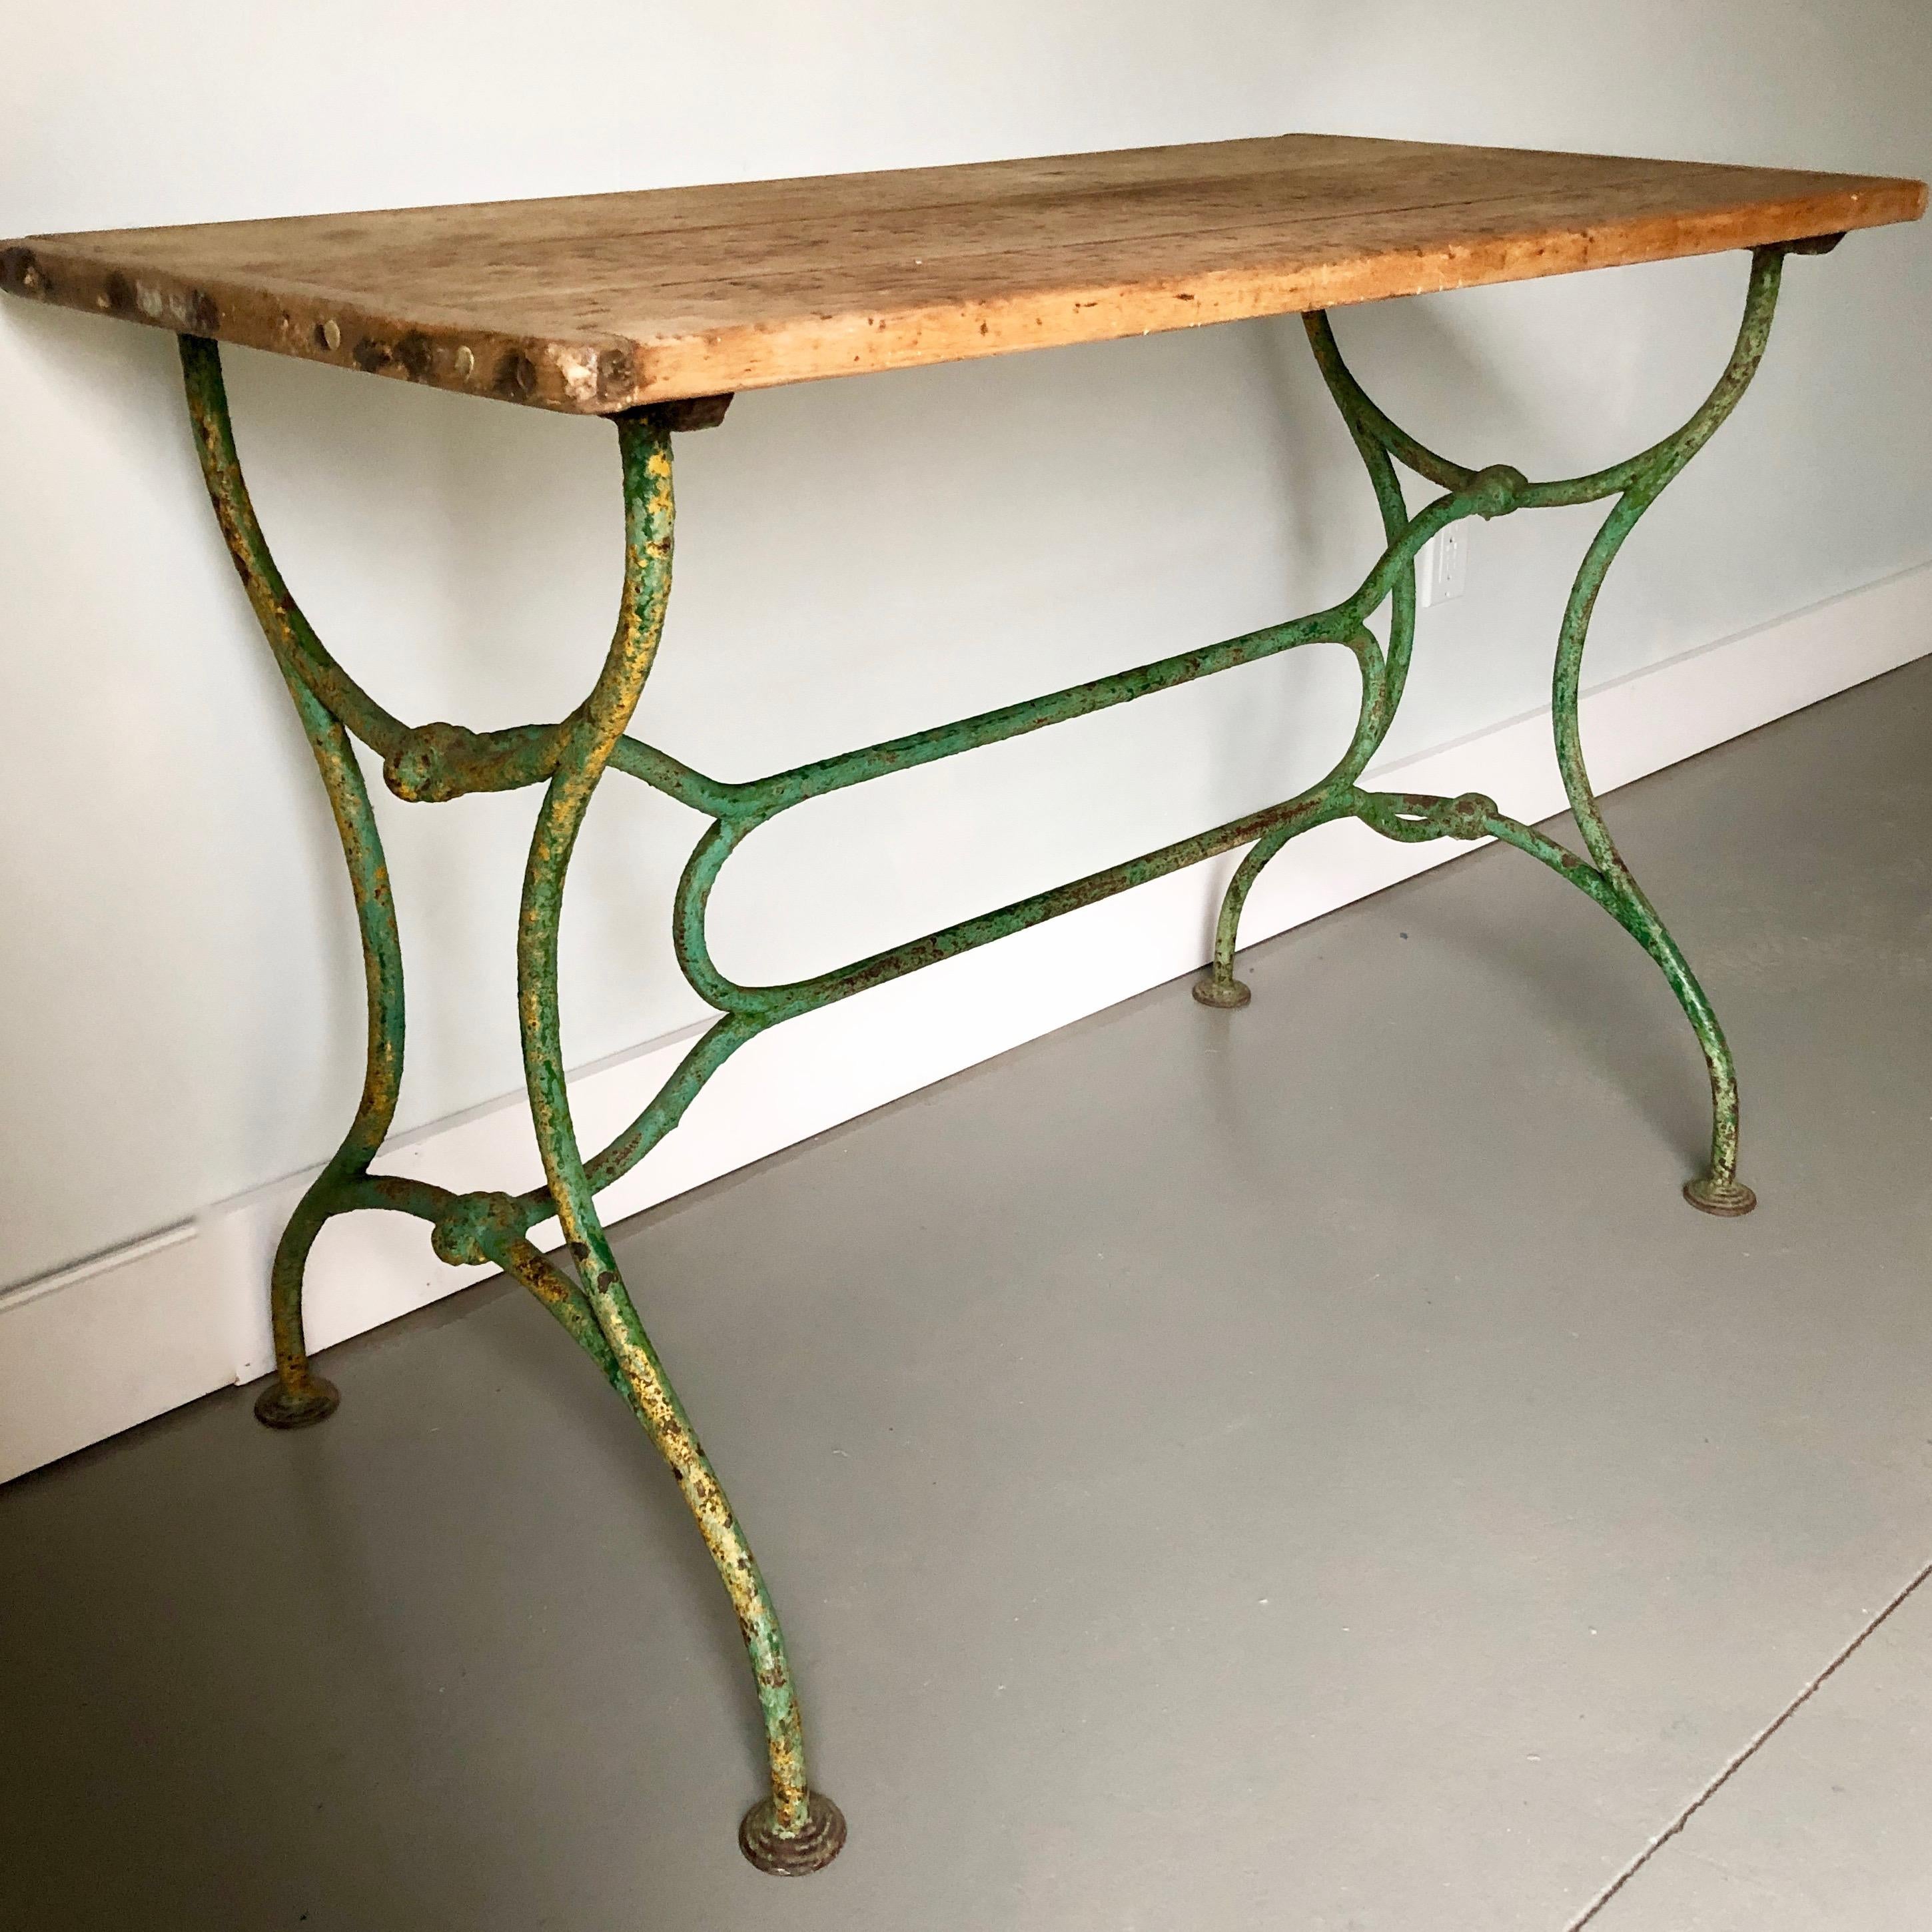 19th century wrought Iron garden table with thick patinated wooden top.
Beautiful addition for the garden room, porch or patio.
Surprising pieces and objects, authentic, decorative and rare items. Discover them all.
 